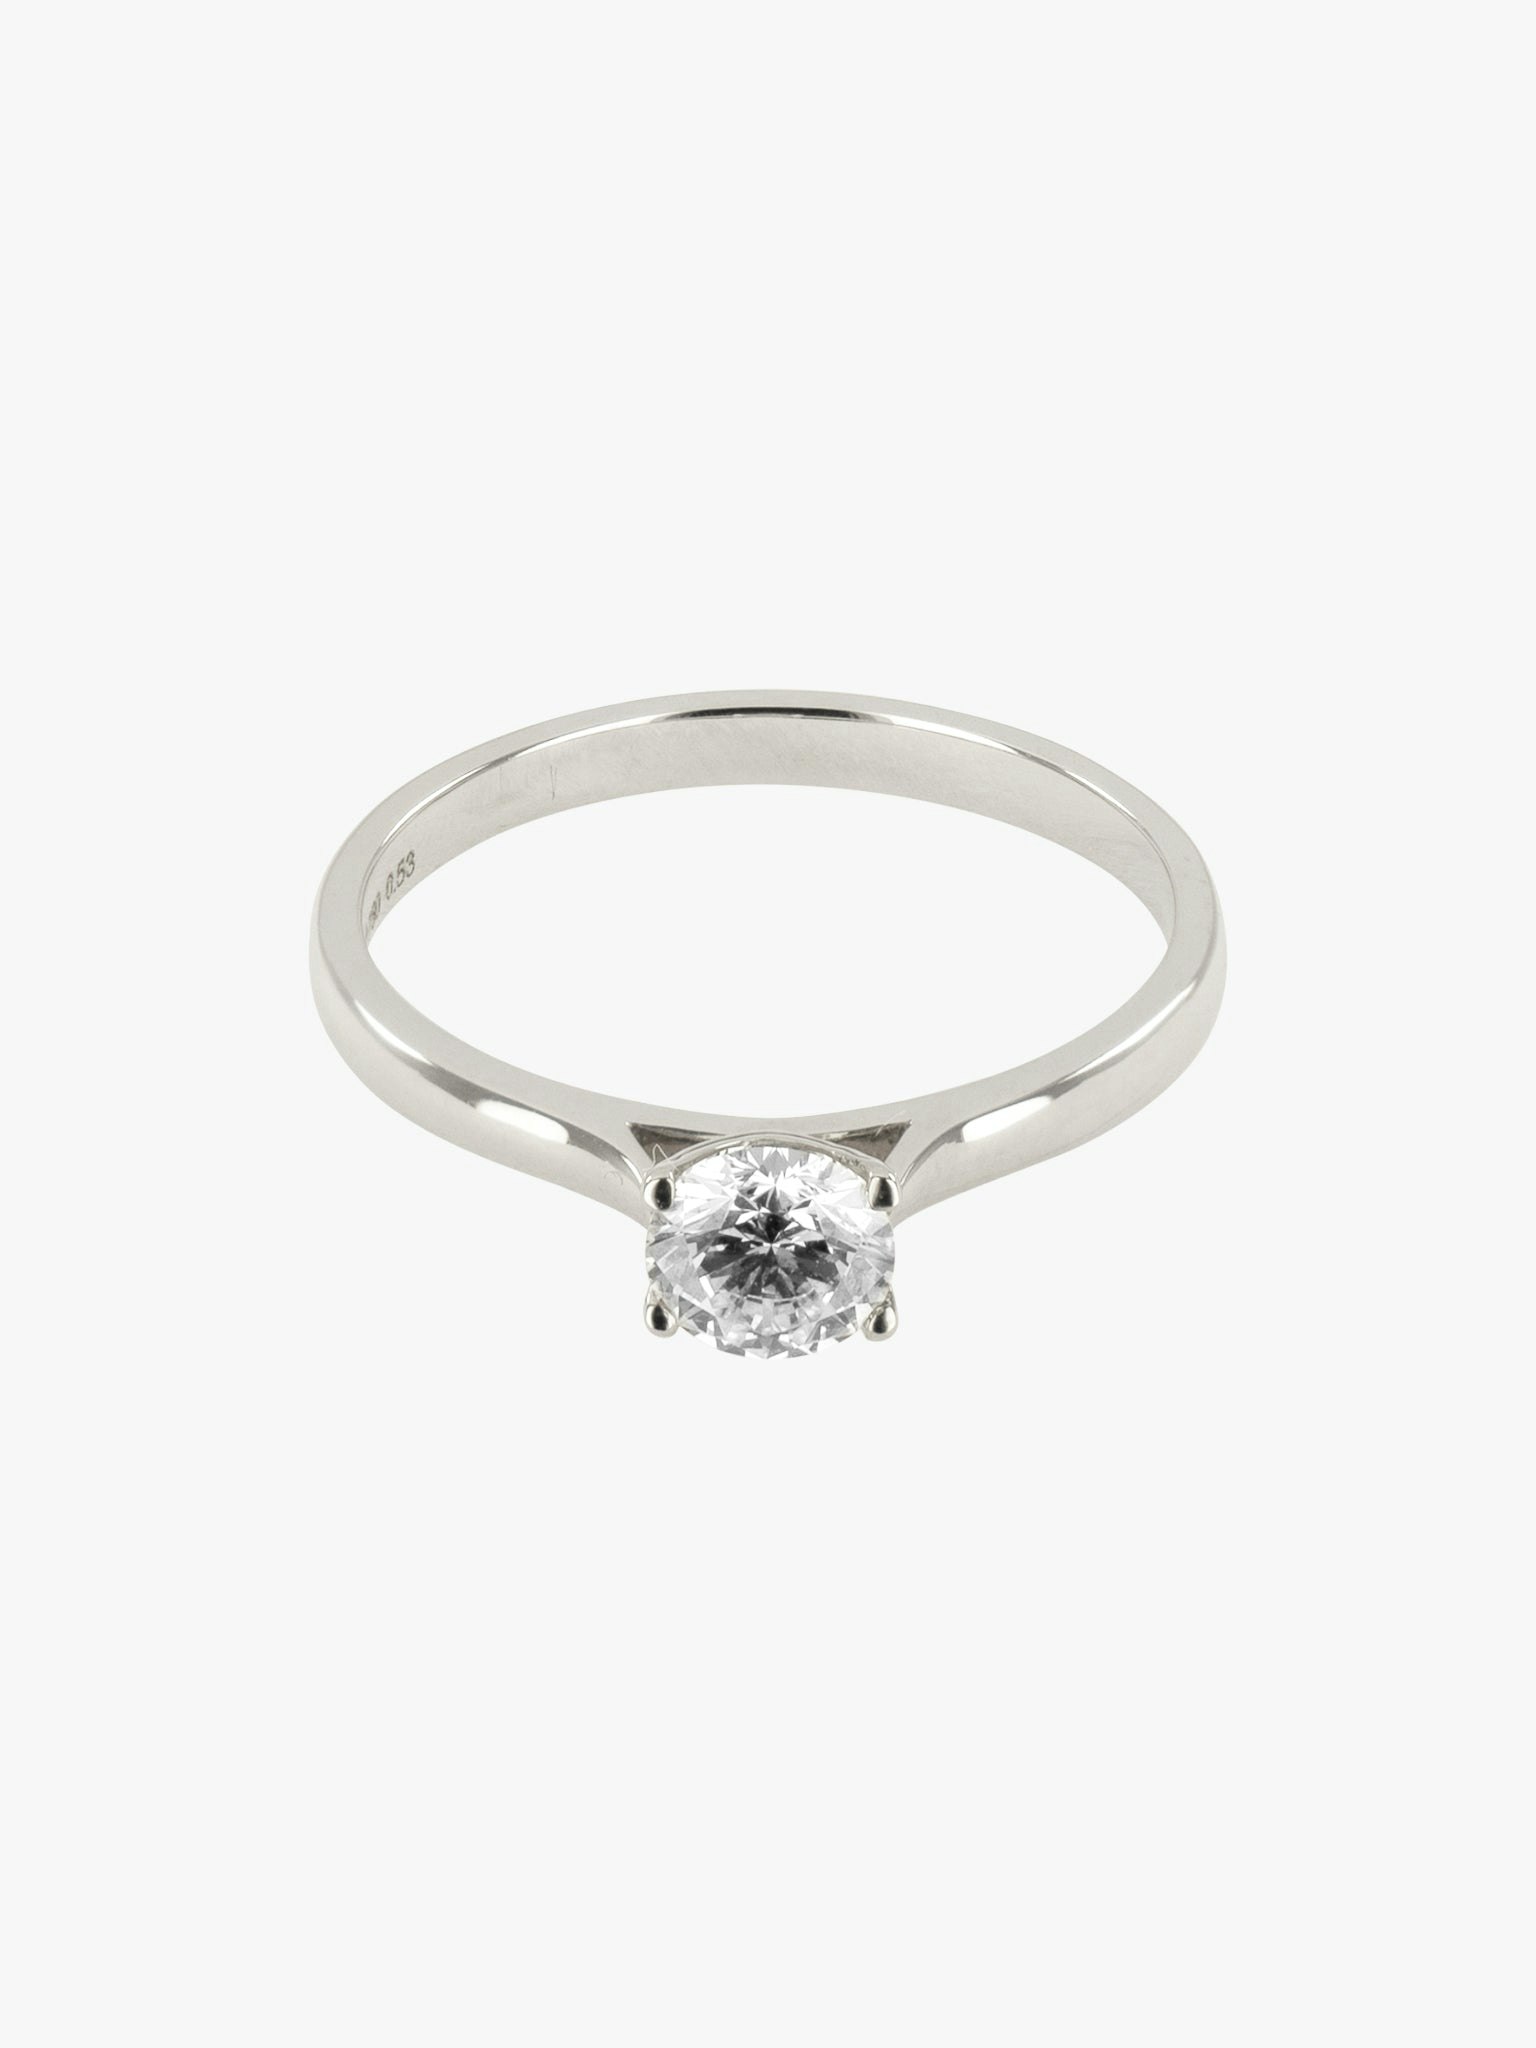 Large solitaire diamond ring photo 3